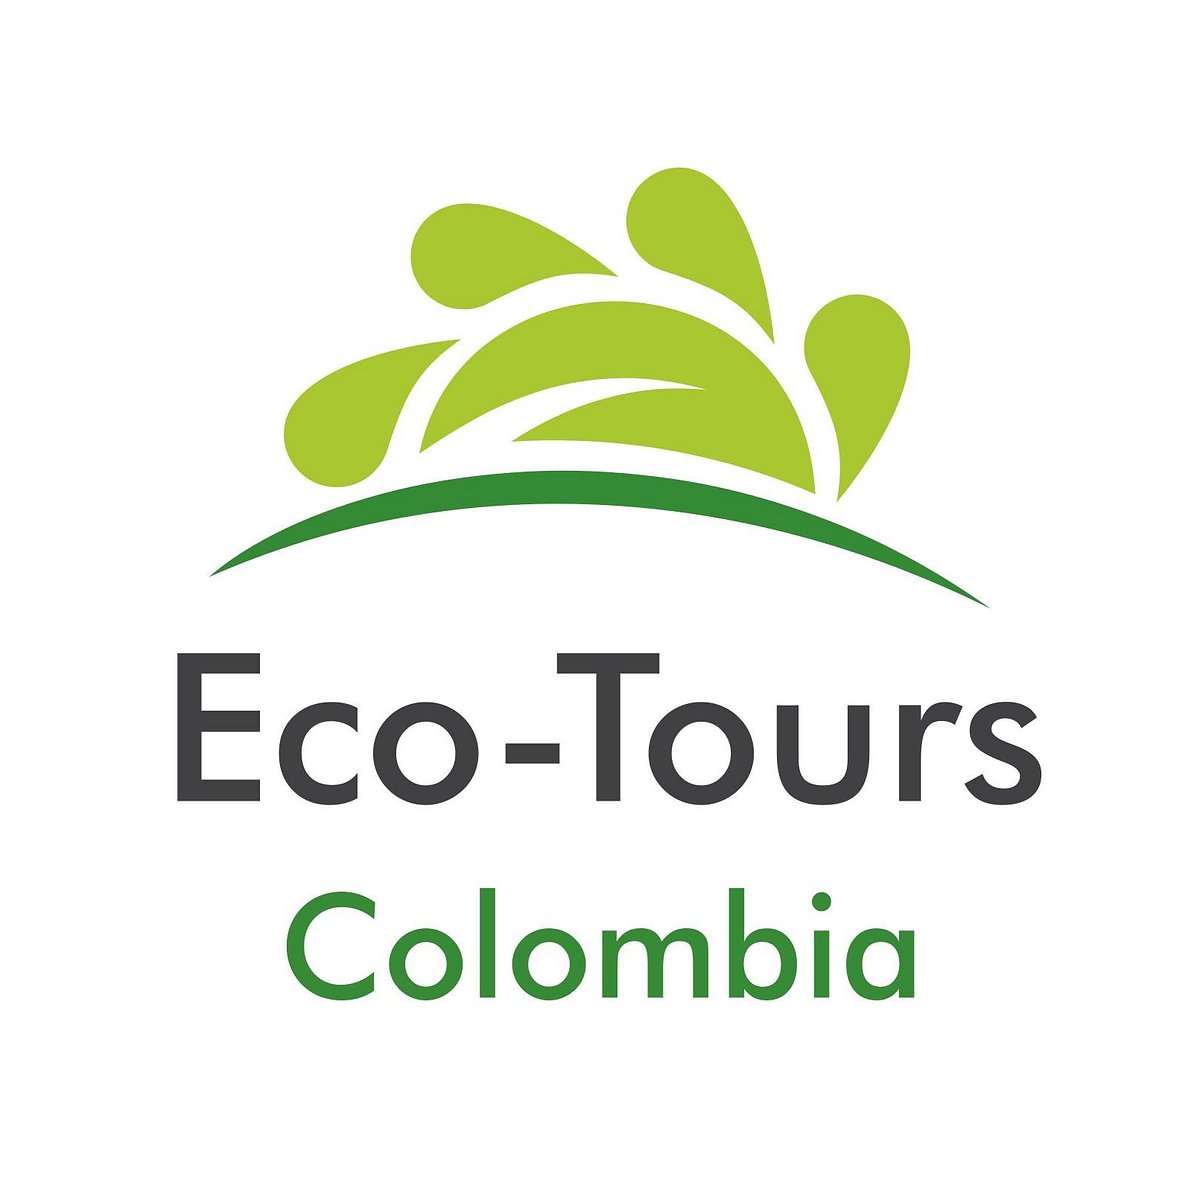 eco tours colombia